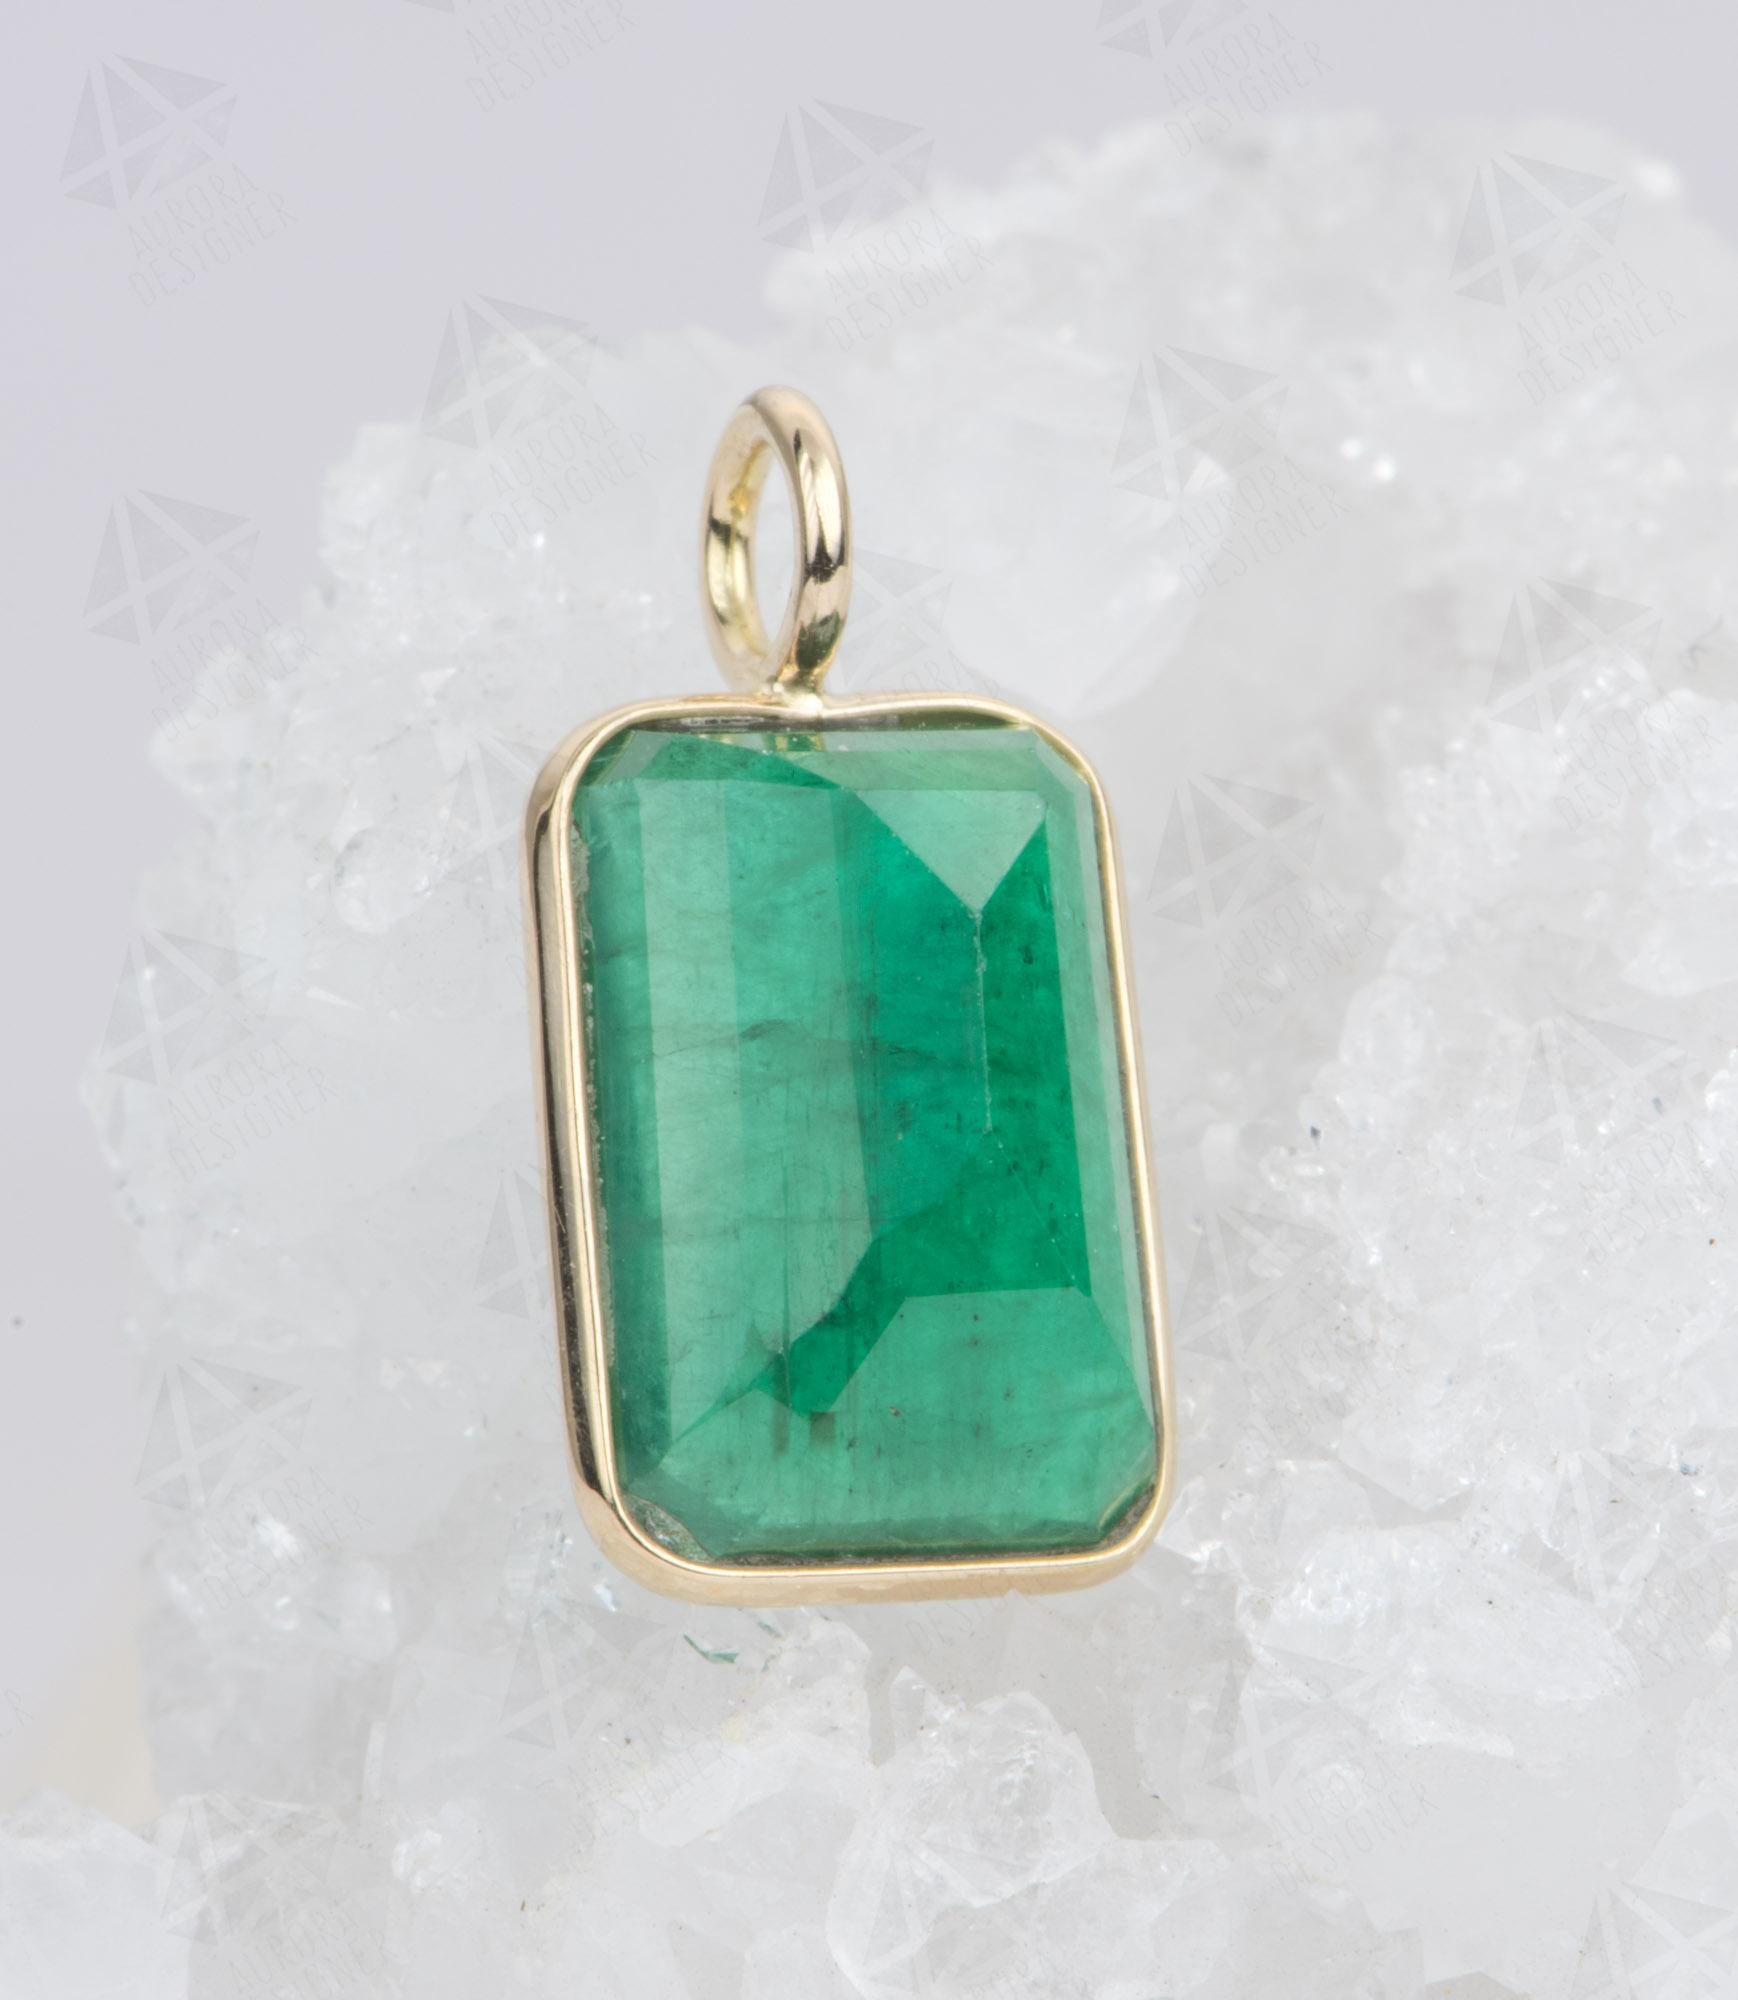 ♥  This faceted rectangle-shaped emerald is set in a simple gold bezel with a gold bail 
♥  This listing is for the pendant ONLY.

♥ Material: 14K yellow gold
♥ Gemstone: Emerald, 5.01ct
♥ Measurements: The overall setting measures 10.2mm in width,